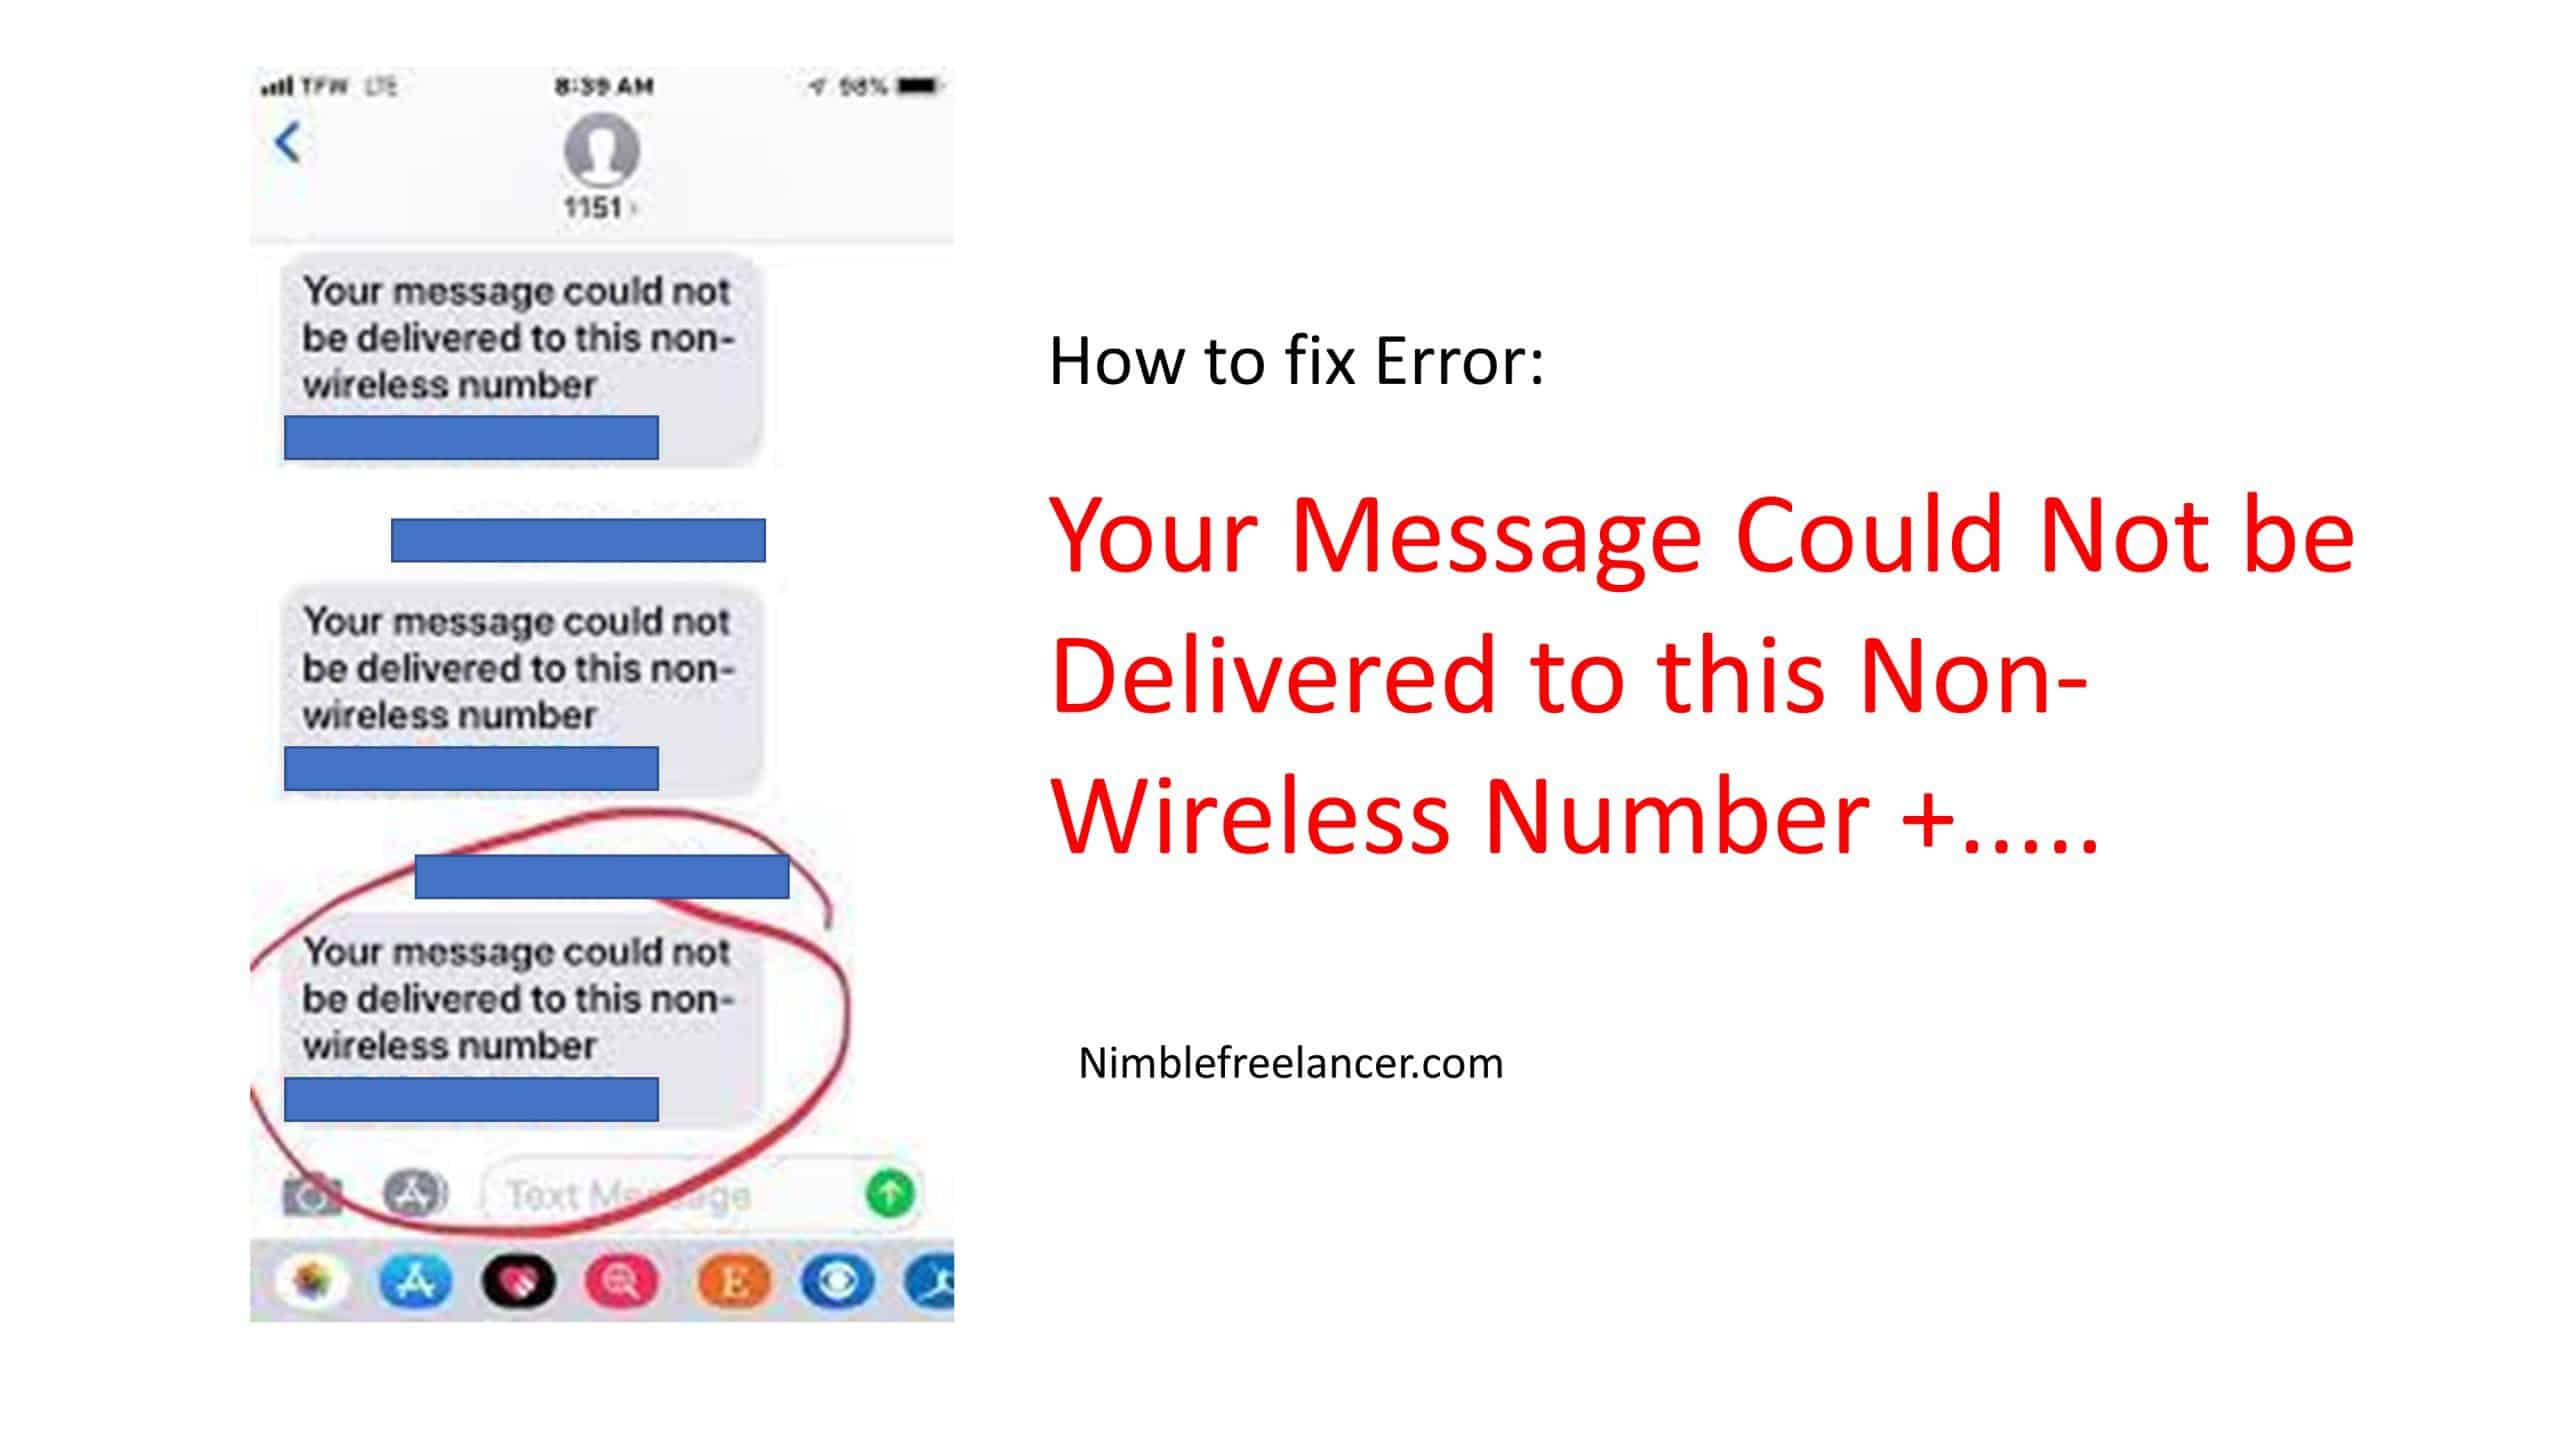 Your Message Could Not be Delivered to this Non-Wireless Number